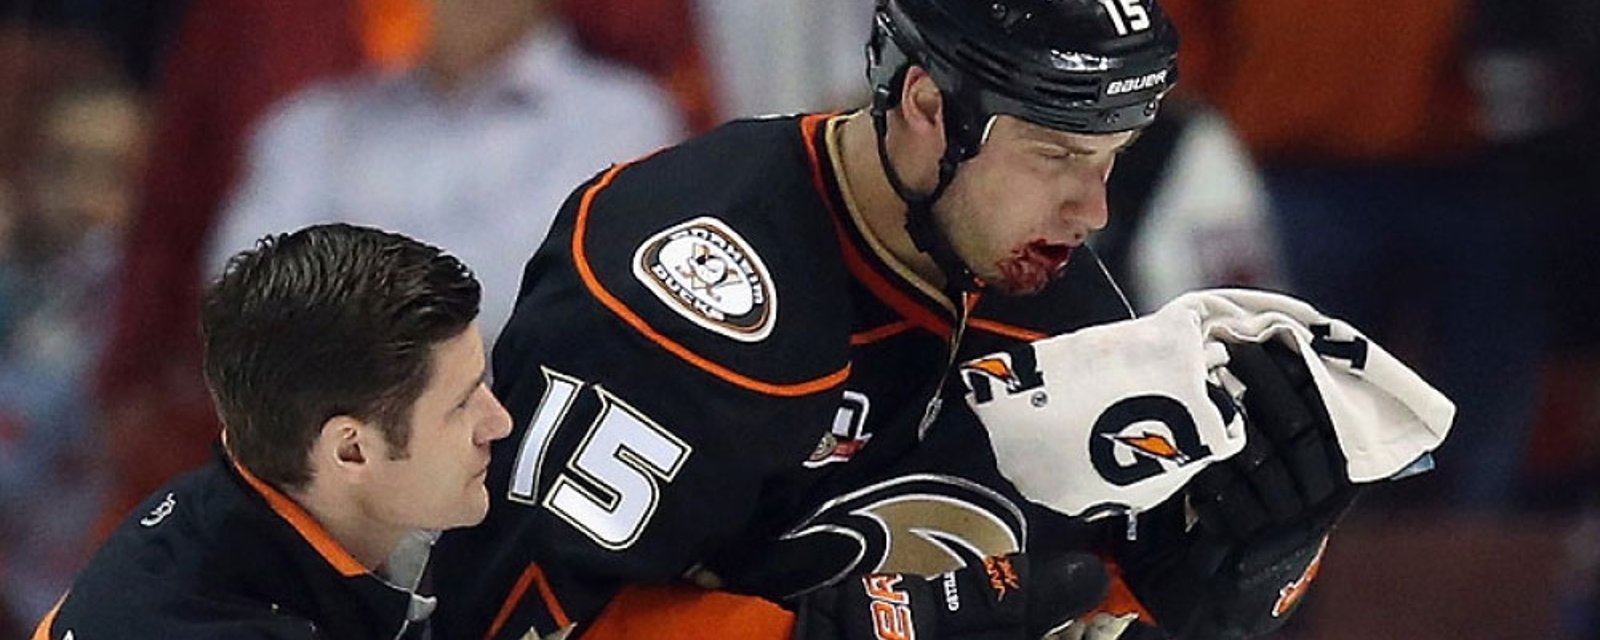 Breaking: The worst is confirmed for Ducks and Getzlaf